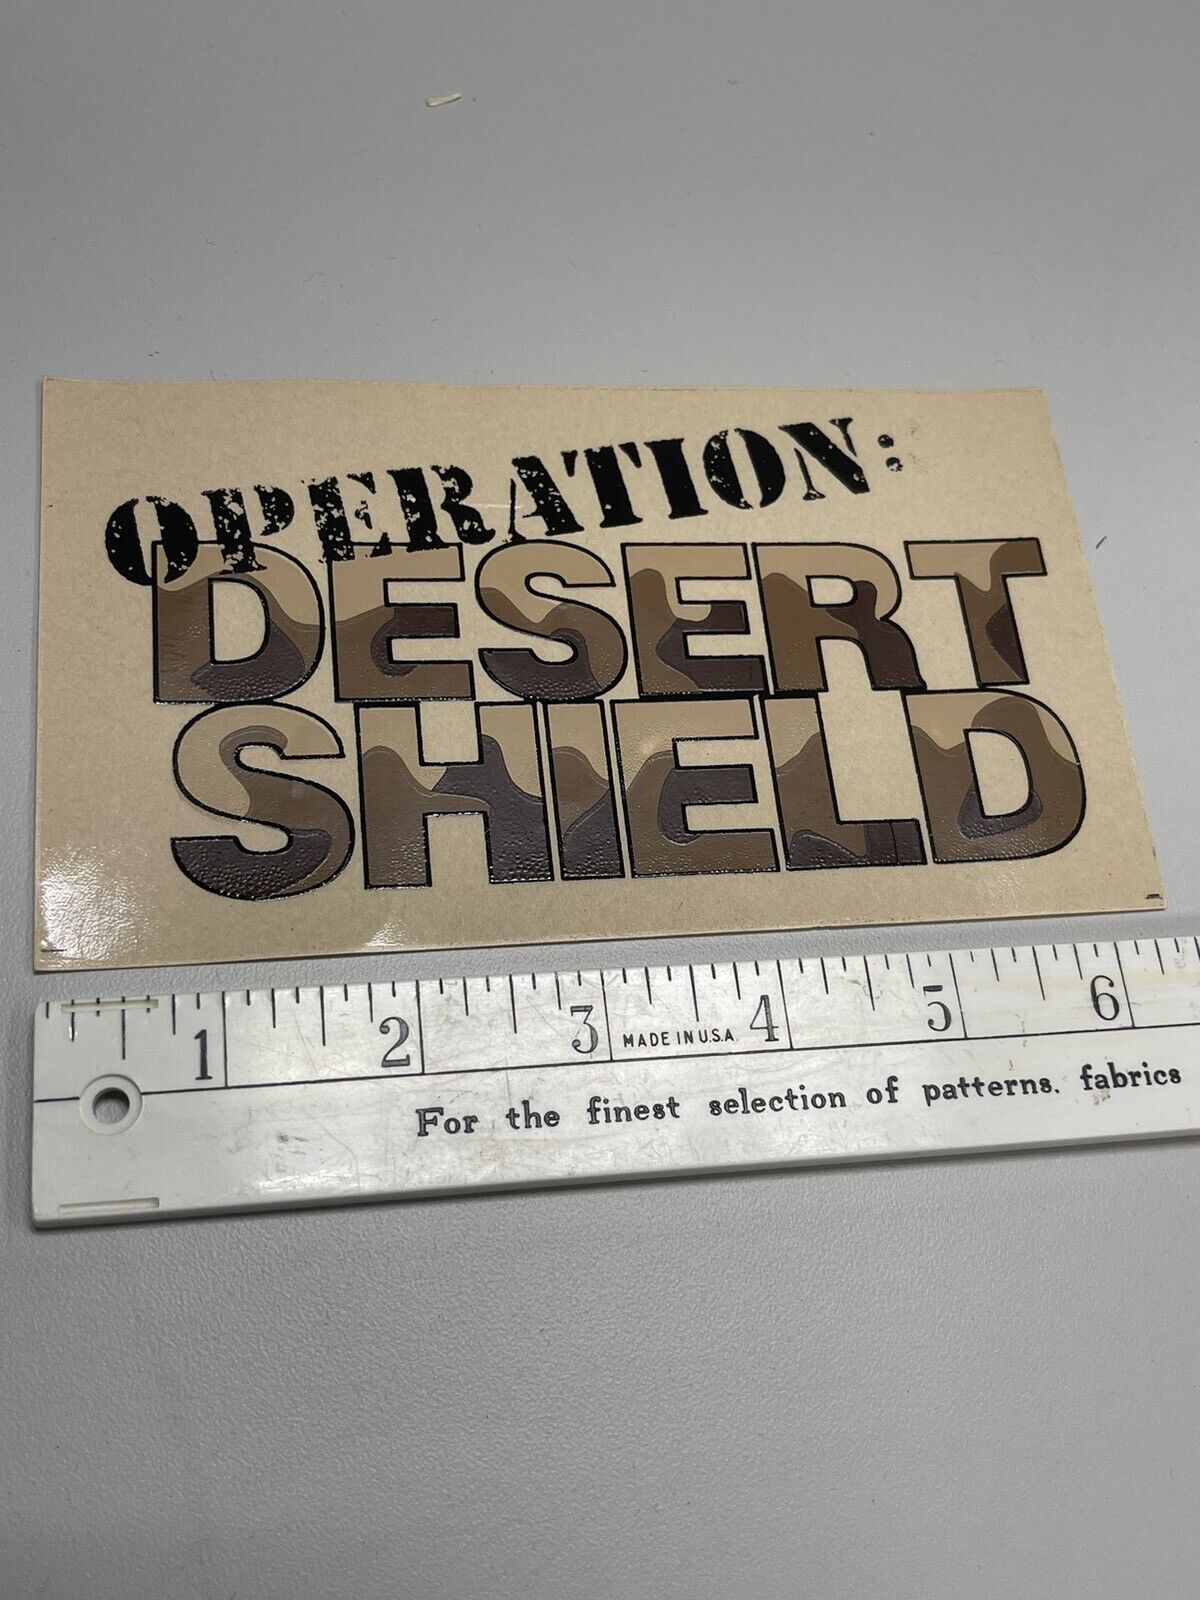 Operation Desert Shield Old Vintage USA Military Decal Sticker Camo 1990s War